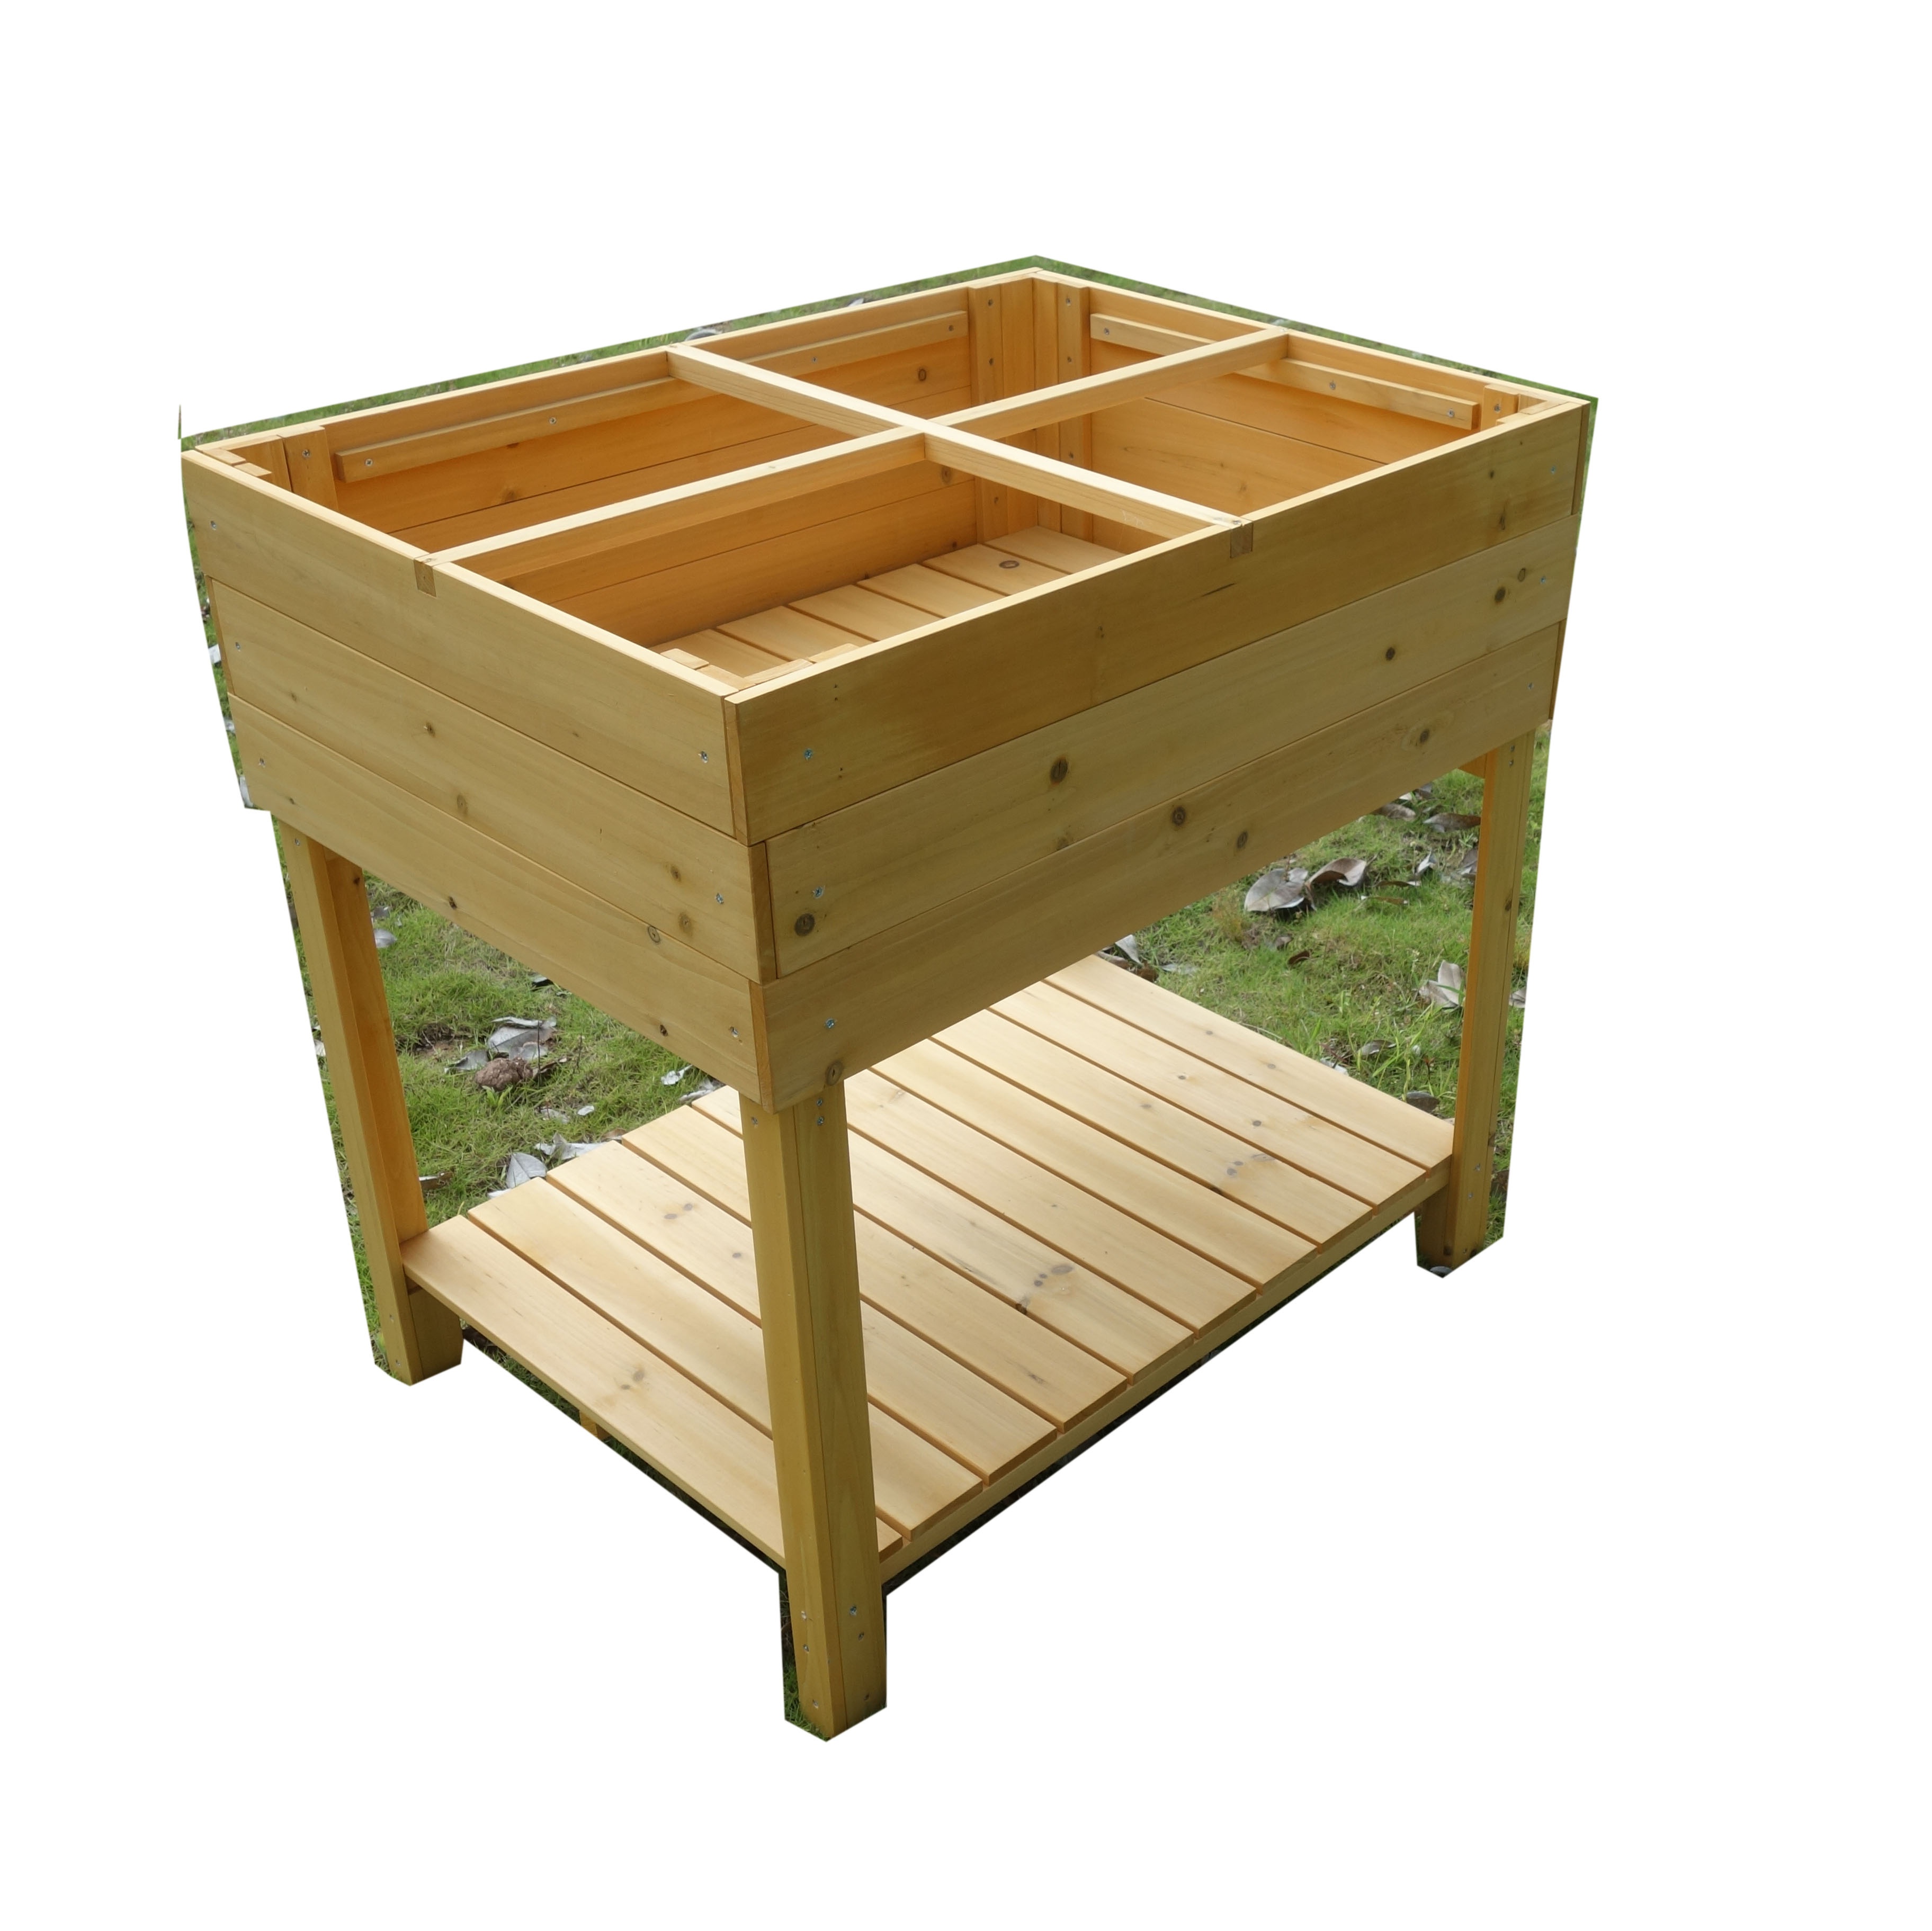 Manufacturer Patio Raised seed Garden Bed furniture wooden Bench Station Planting Workbench outdoor potting table planter